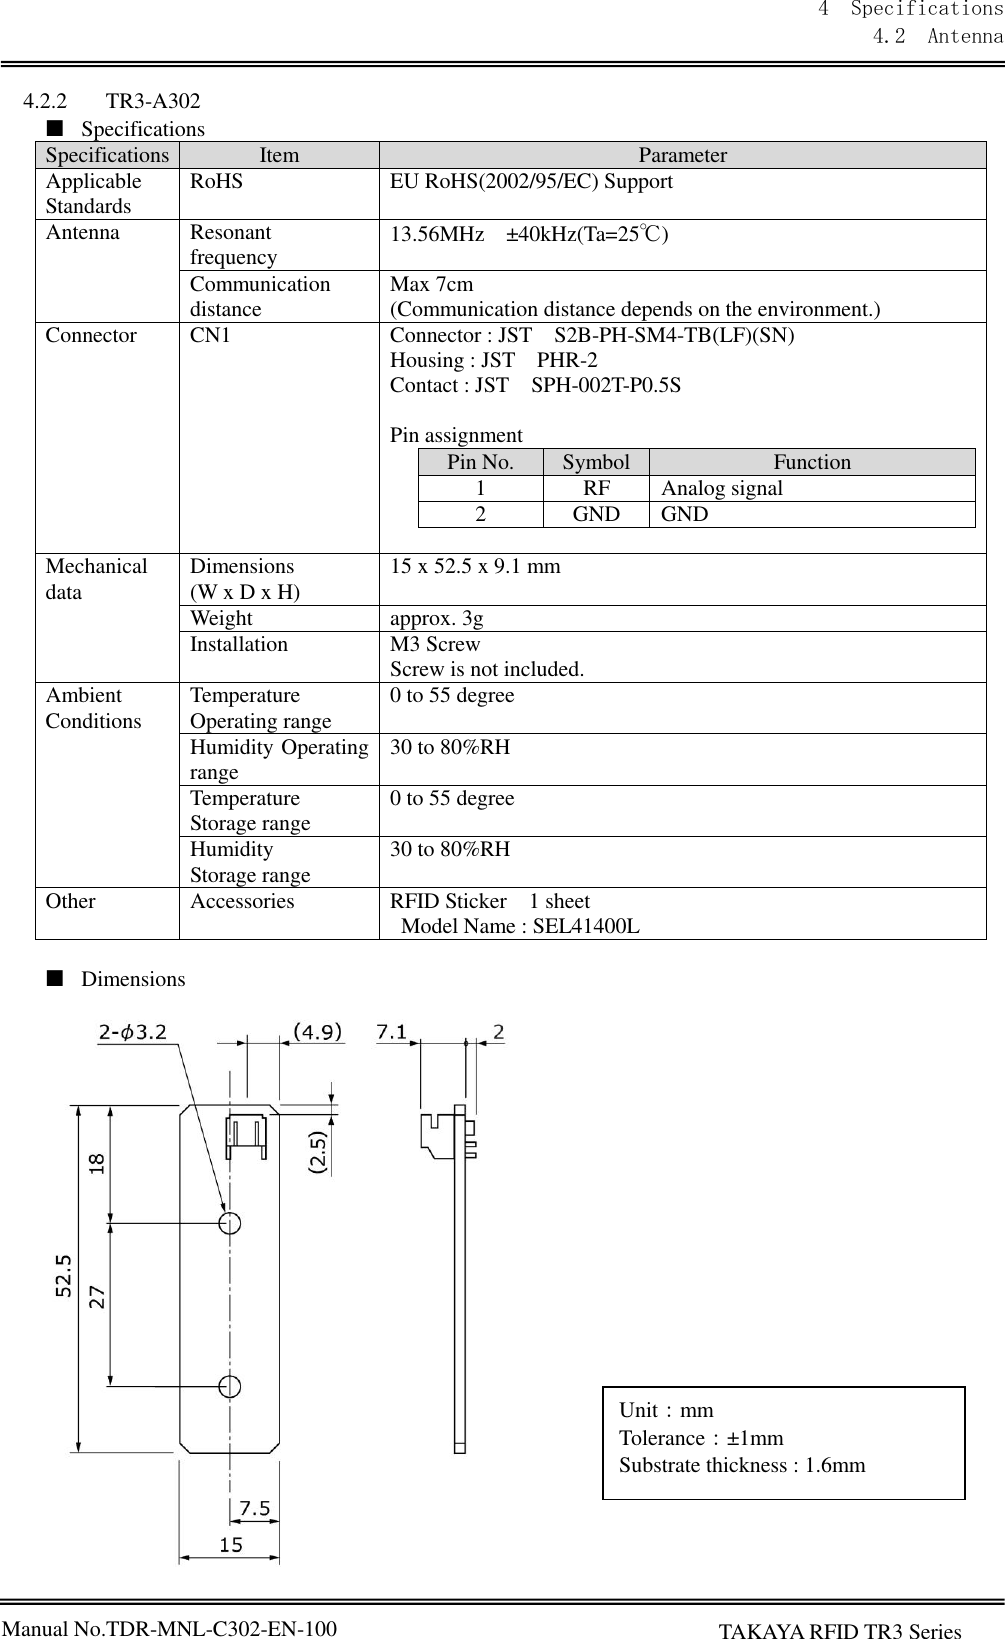 Manual No.TDR-MNL-C302-EN-100 4  Specifications 4.2  Antenna      TAKAYA RFID TR3 Series  4.2.2 TR3-A302 ■ Specifications Specifications Item Parameter Applicable Standards RoHS EU RoHS(2002/95/EC) Support Antenna Resonant frequency 13.56MHz ±40kHz(Ta=25℃) Communication distance Max 7cm (Communication distance depends on the environment.) Connector CN1 Connector : JST S2B-PH-SM4-TB(LF)(SN) Housing : JST PHR-2 Contact : JST SPH-002T-P0.5S  Pin assignment Pin No. Symbol Function 1 RF Analog signal 2 GND GND    Mechanical data Dimensions (W x D x H) 15 x 52.5 x 9.1 mm Weight approx. 3g Installation M3 Screw   Screw is not included. Ambient Conditions Temperature Operating range 0 to 55 degree Humidity Operating range 30 to 80%RH Temperature Storage range 0 to 55 degree Humidity Storage range 30 to 80%RH Other Accessories RFID Sticker 1 sheet   Model Name : SEL41400L  ■ Dimensions                    Unit：mm Tolerance：±1mm Substrate thickness : 1.6mm 